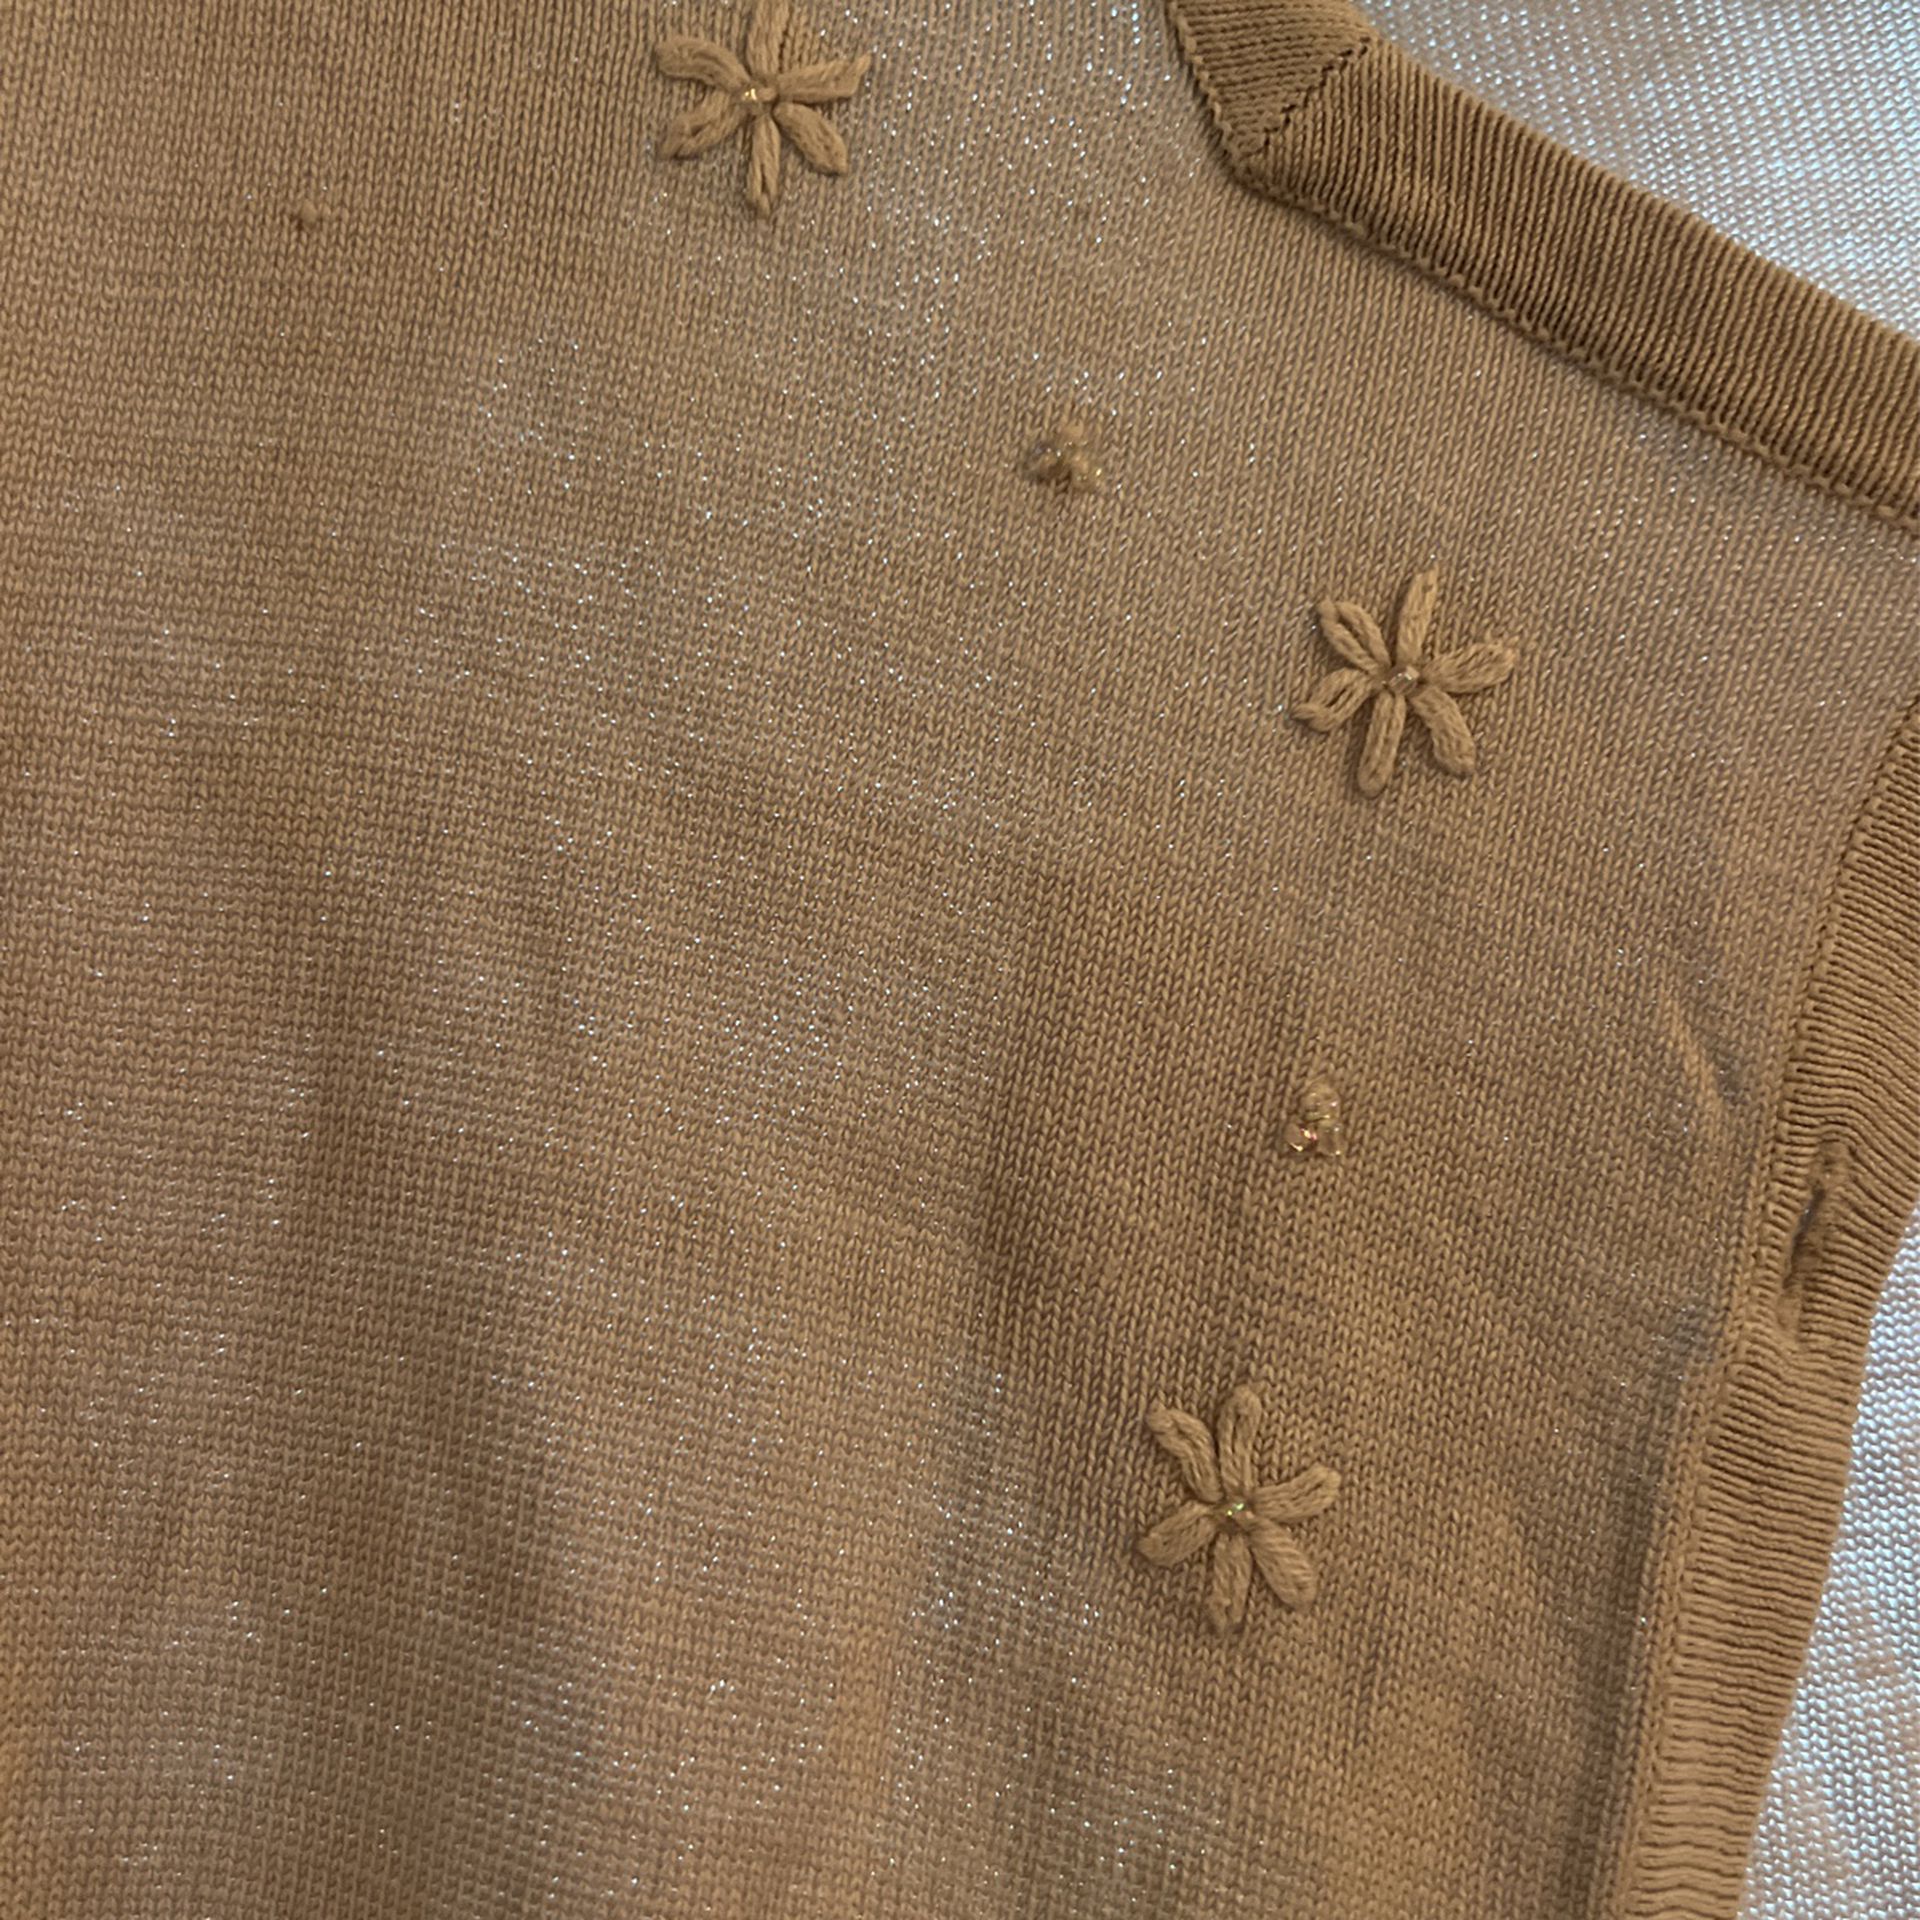 Tan Cardigan With Embroidered Flowers 